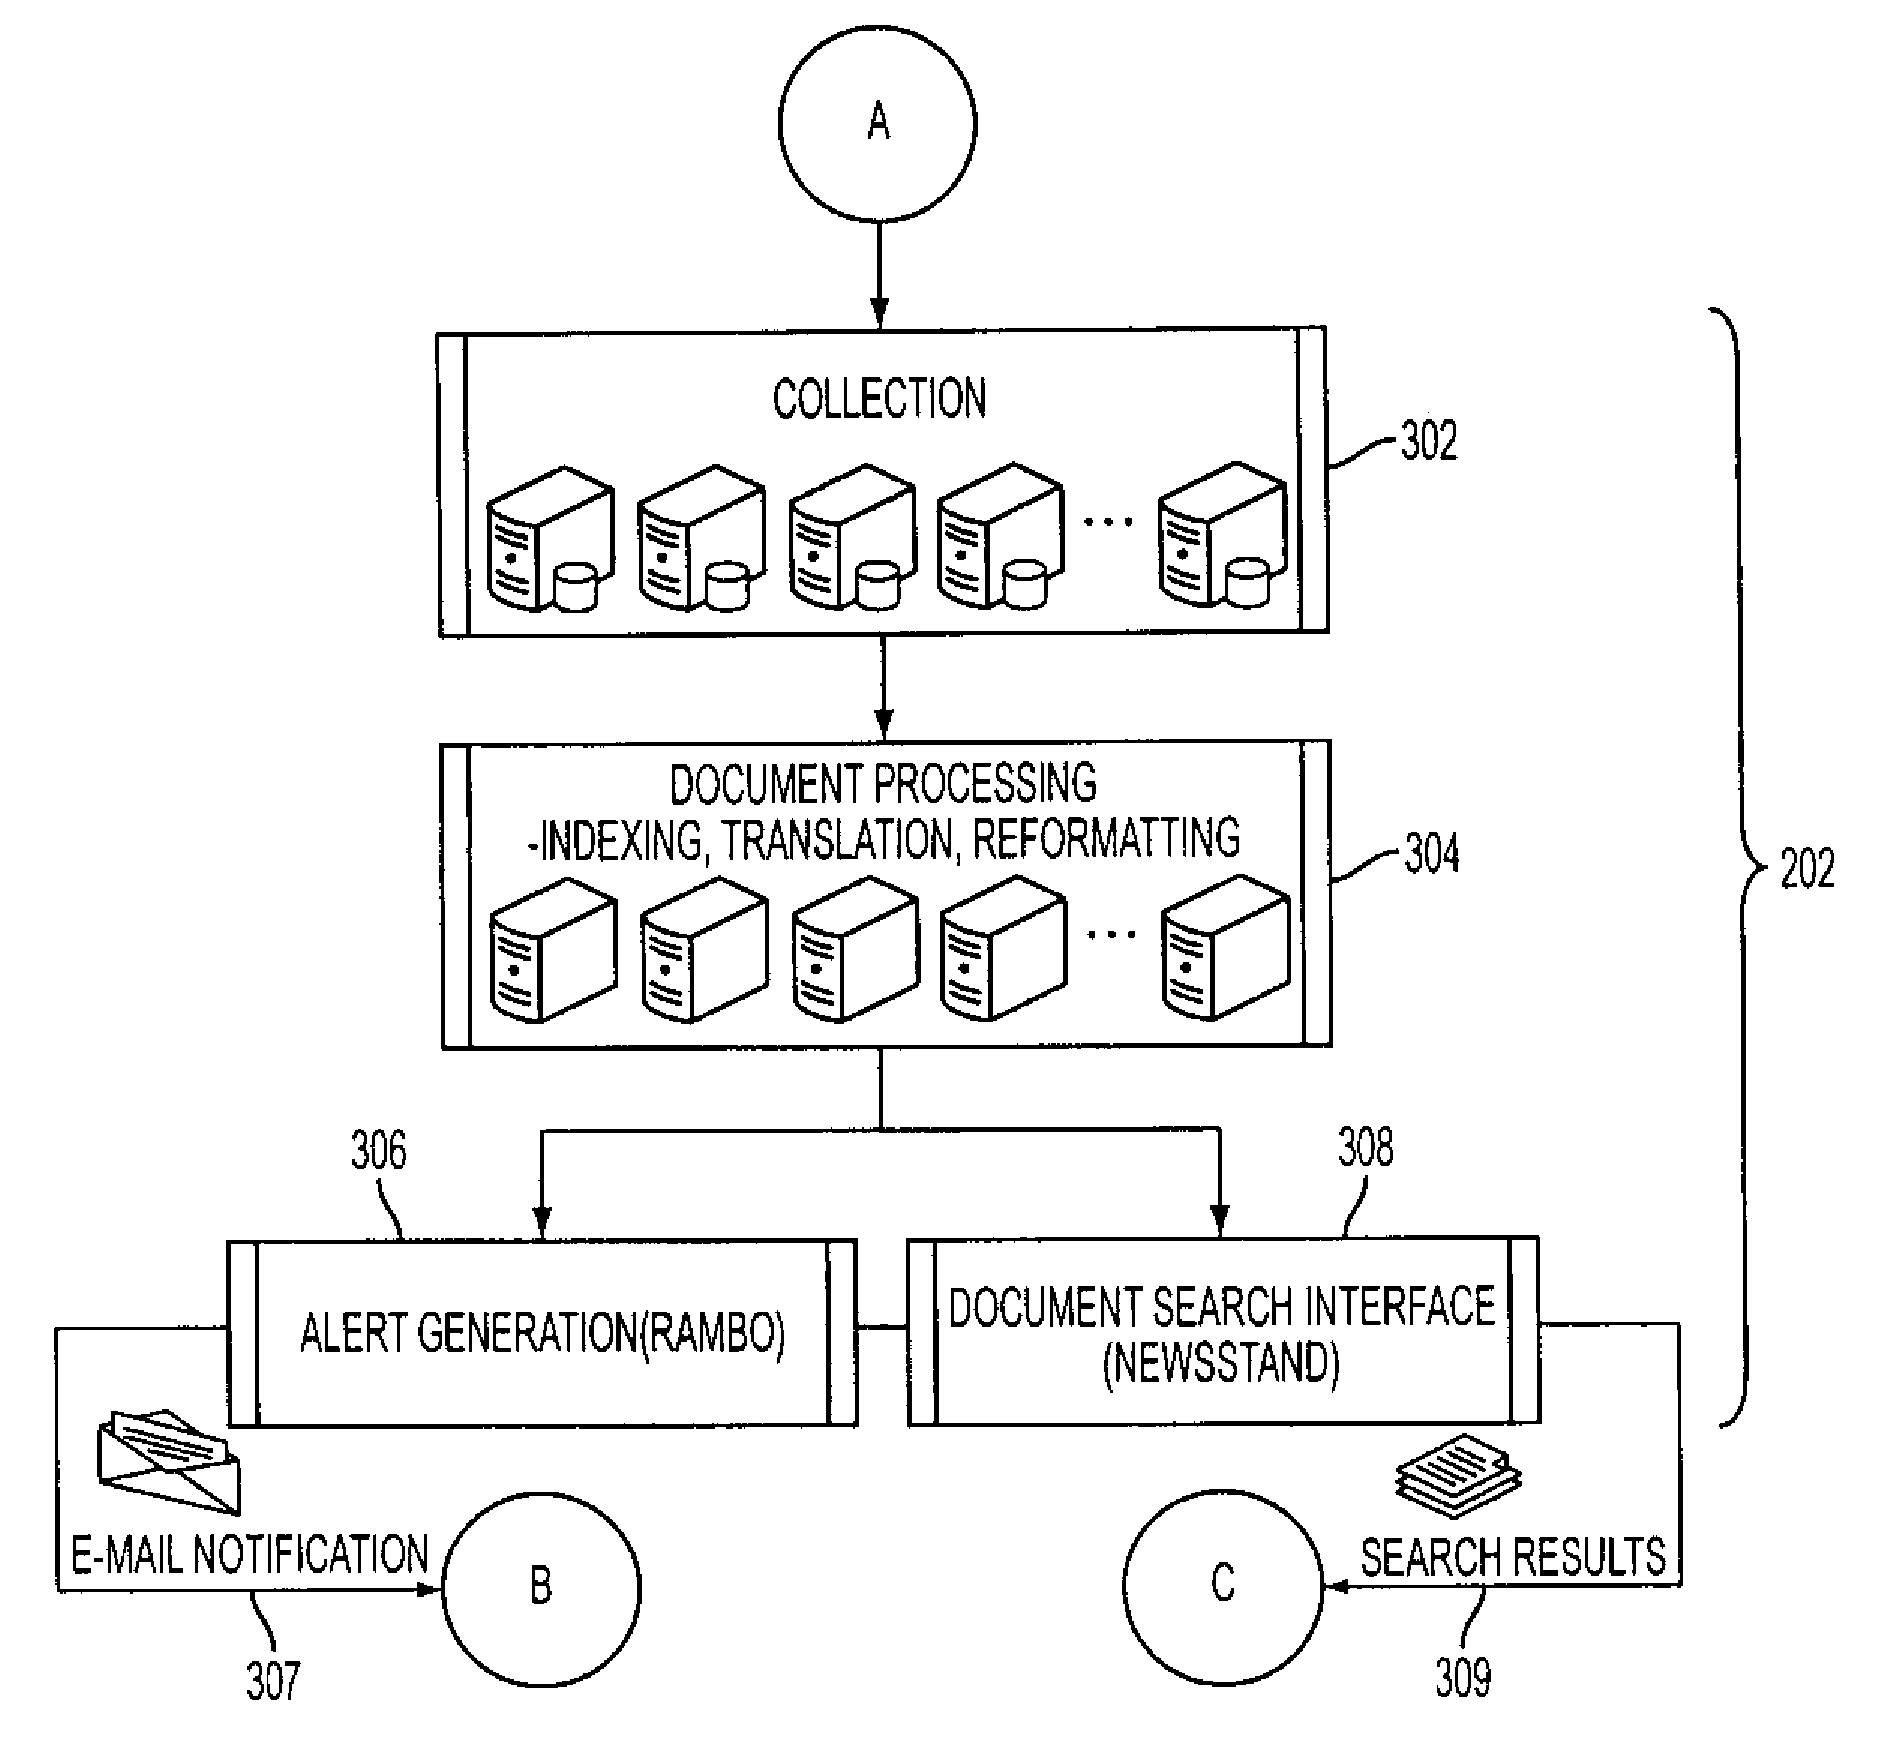 System and method for detecting, collecting, analyzing, and communicating event related information